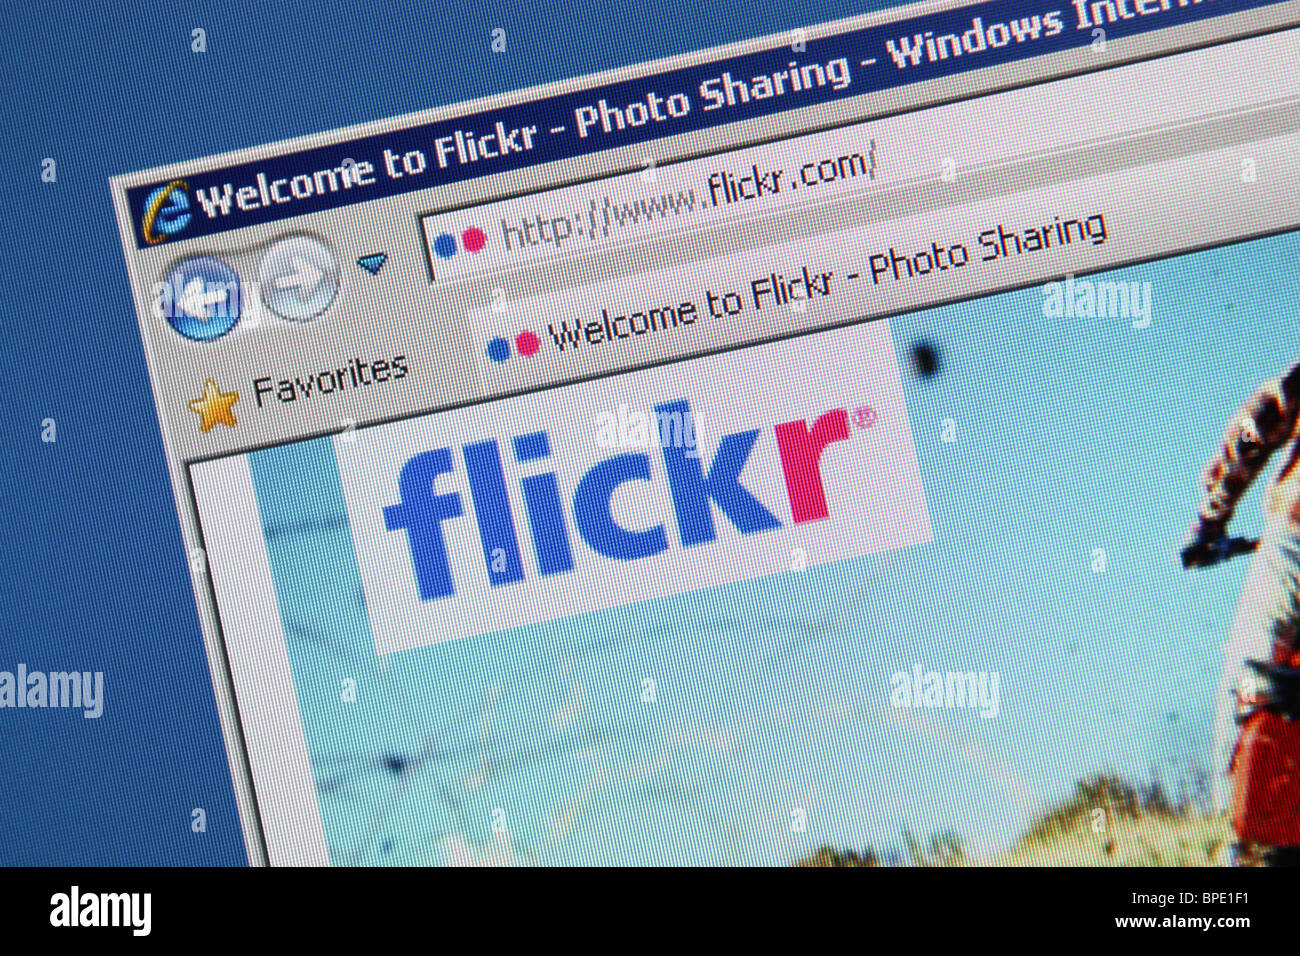 flickr online photo sharing social networking site Stock Photo